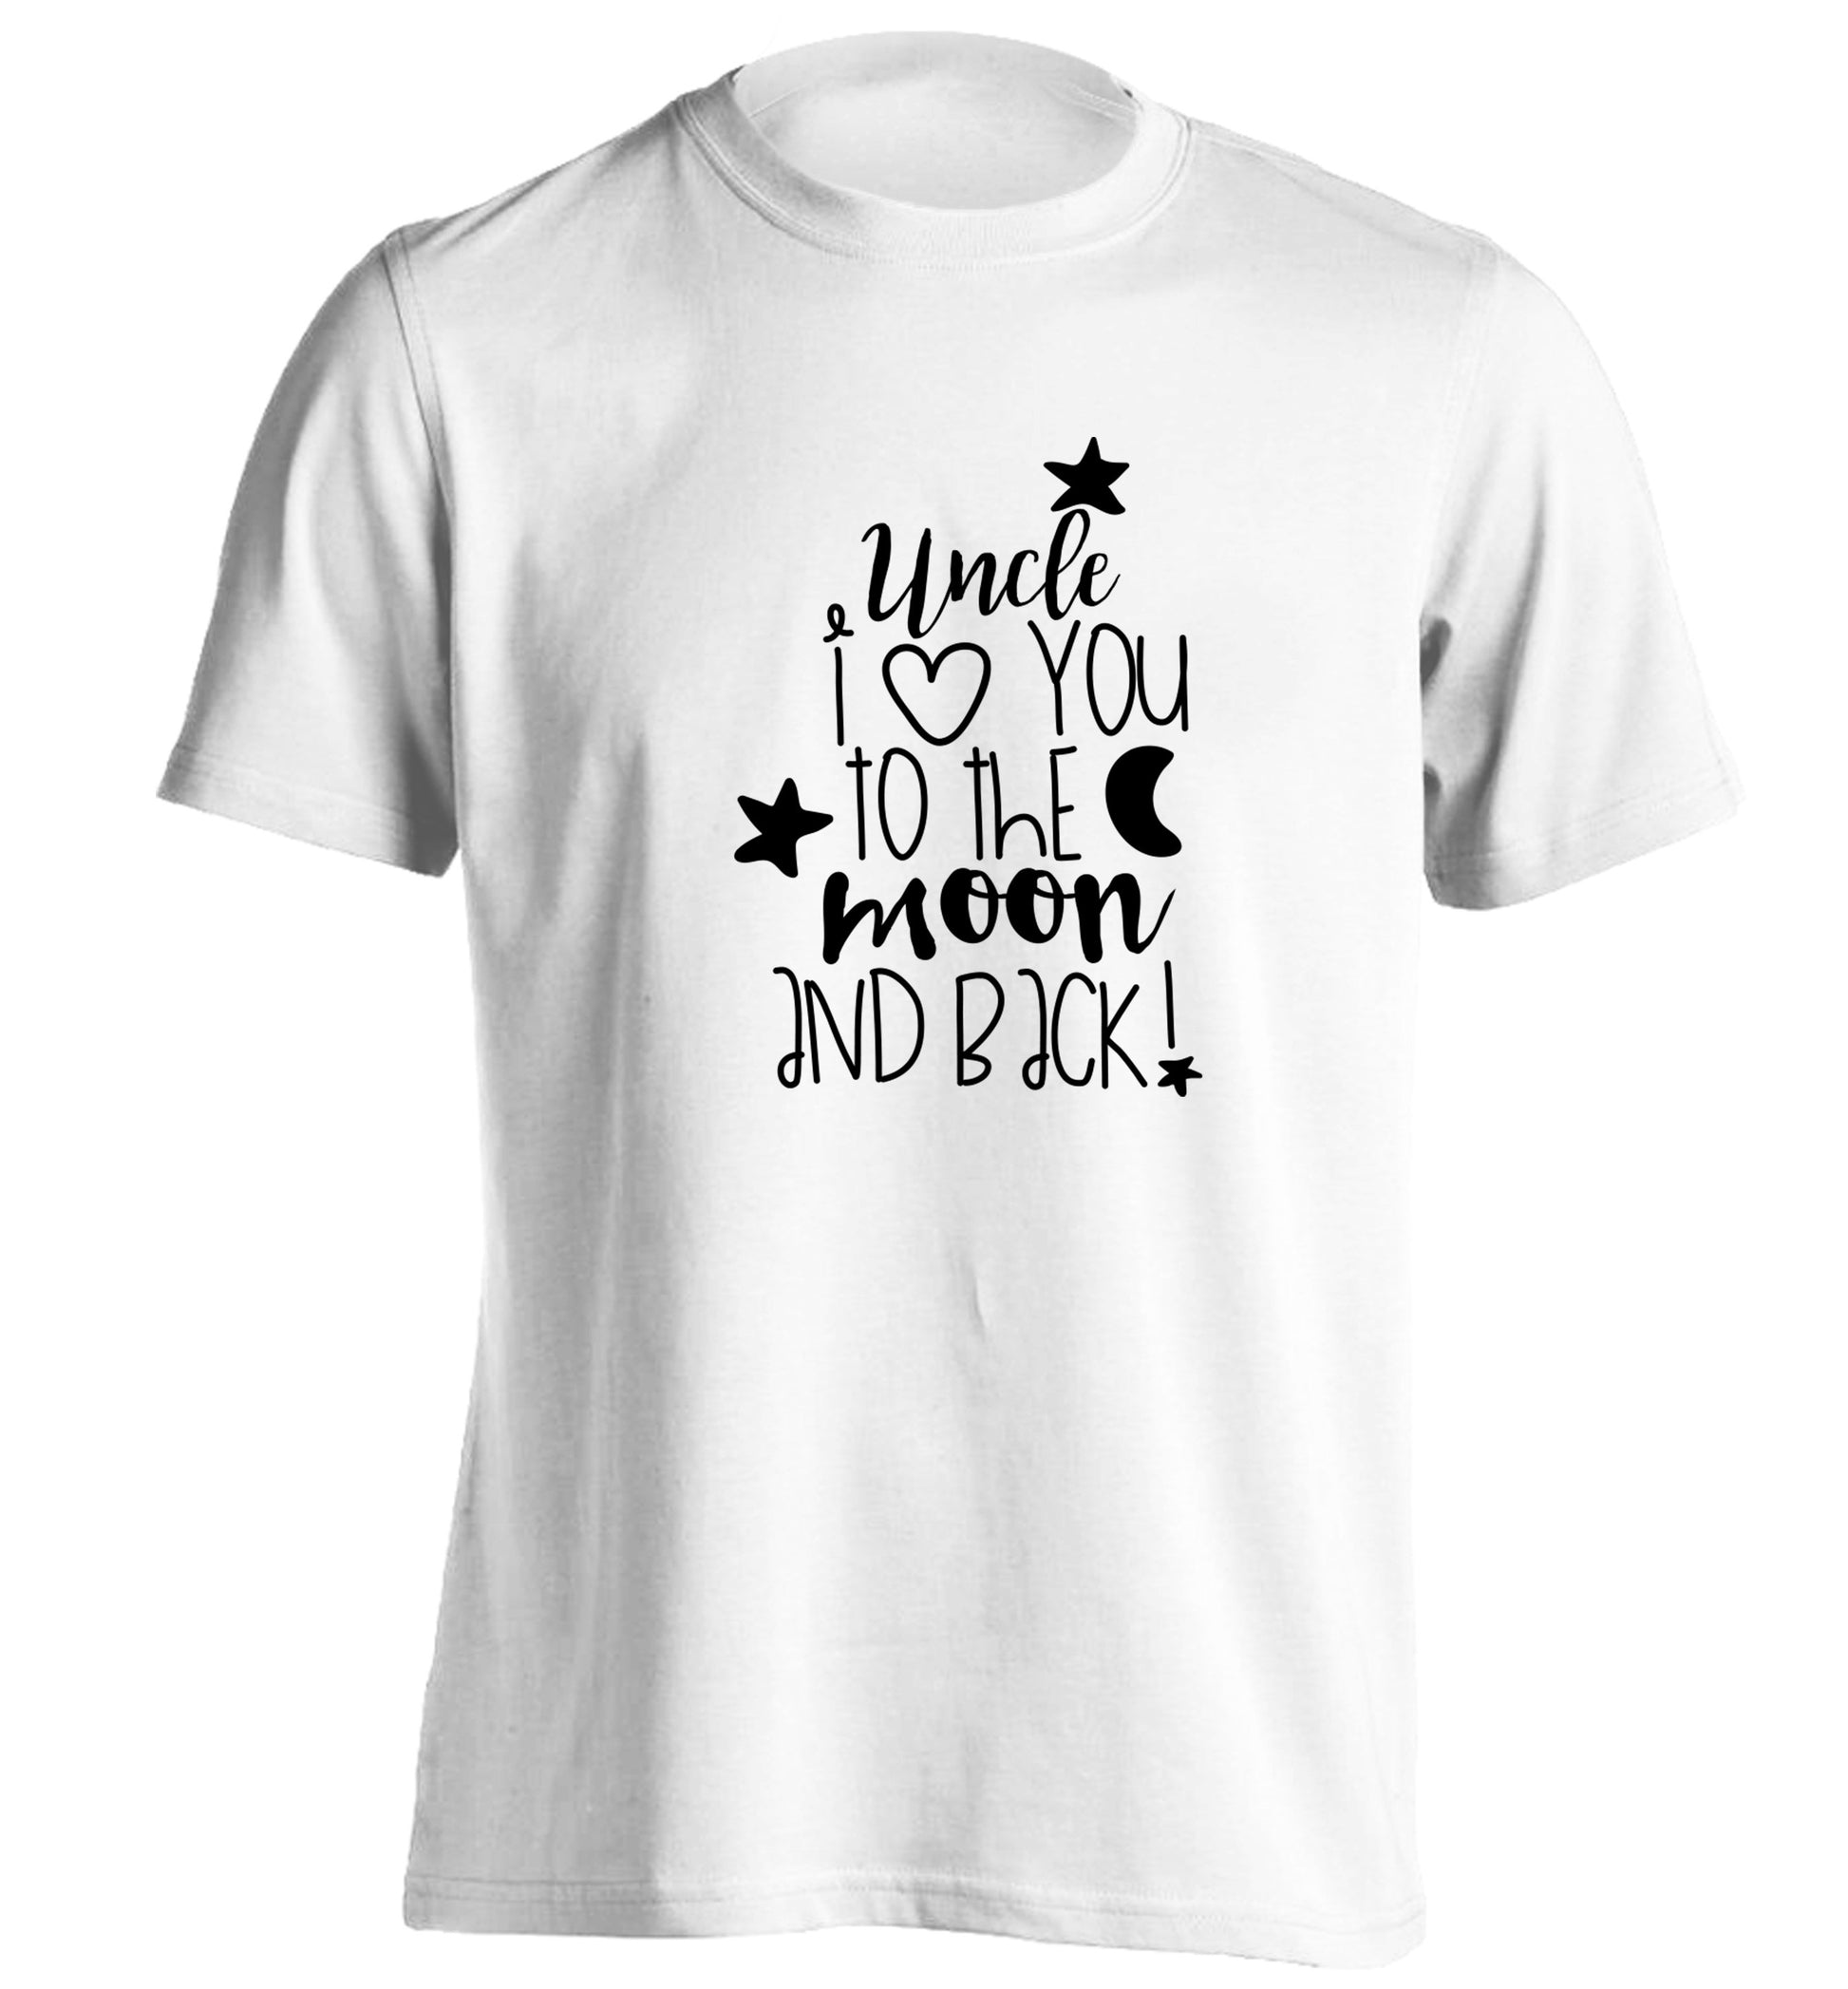 Uncle I love you to the moon and back adults unisex white Tshirt 2XL